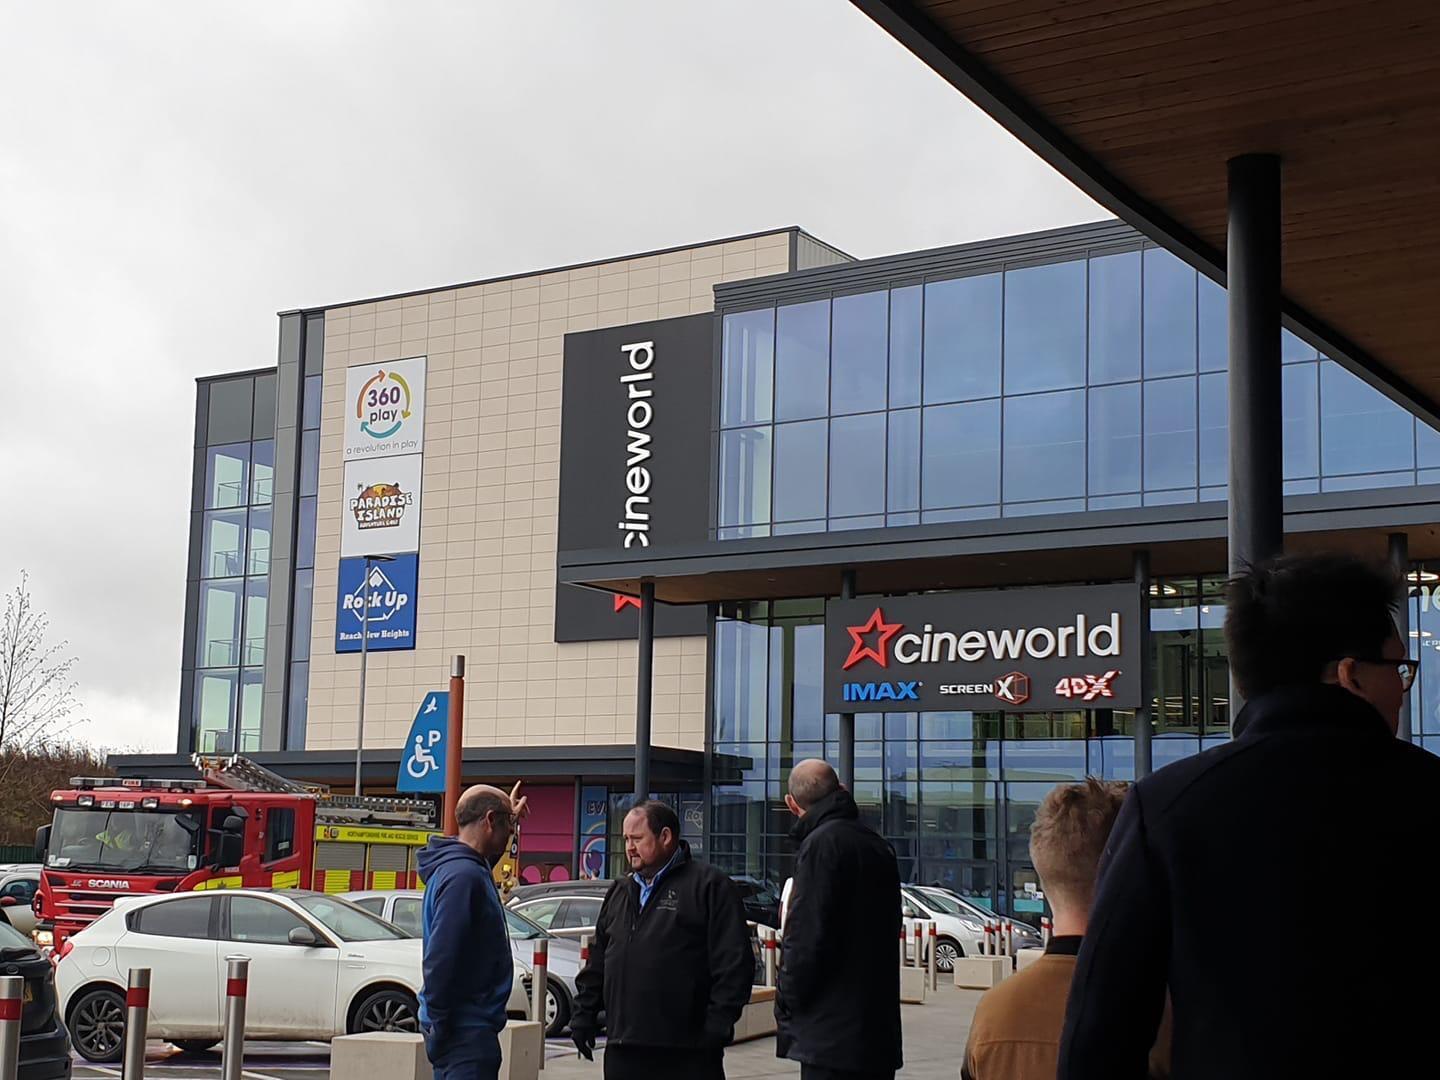 At noon, Cineworld and 360 Play at Rushden Lakes announced they would shut this afternoon after tiles began to blow off the brand new roof there.